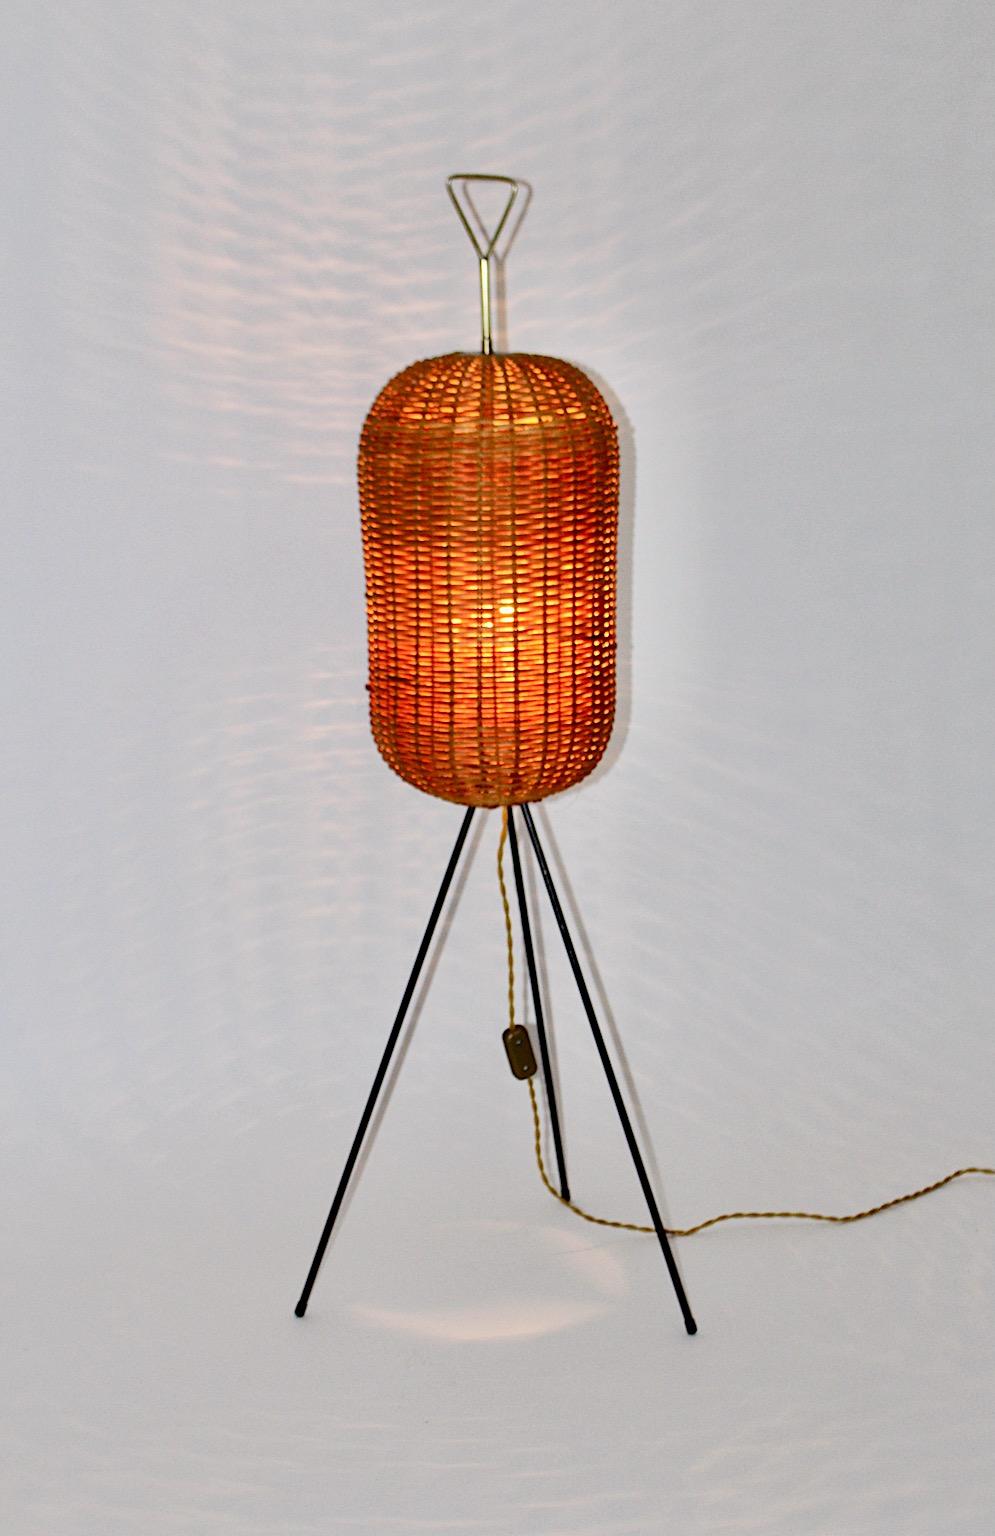 Mid-Century Modern vintage organic trilegged floor lamp from rattan, brass and metal 1950s Vienna.
While the lamp shade from rattan network bee hive like is in very good condition and shows caramel brown color tone, the frame made from brass and